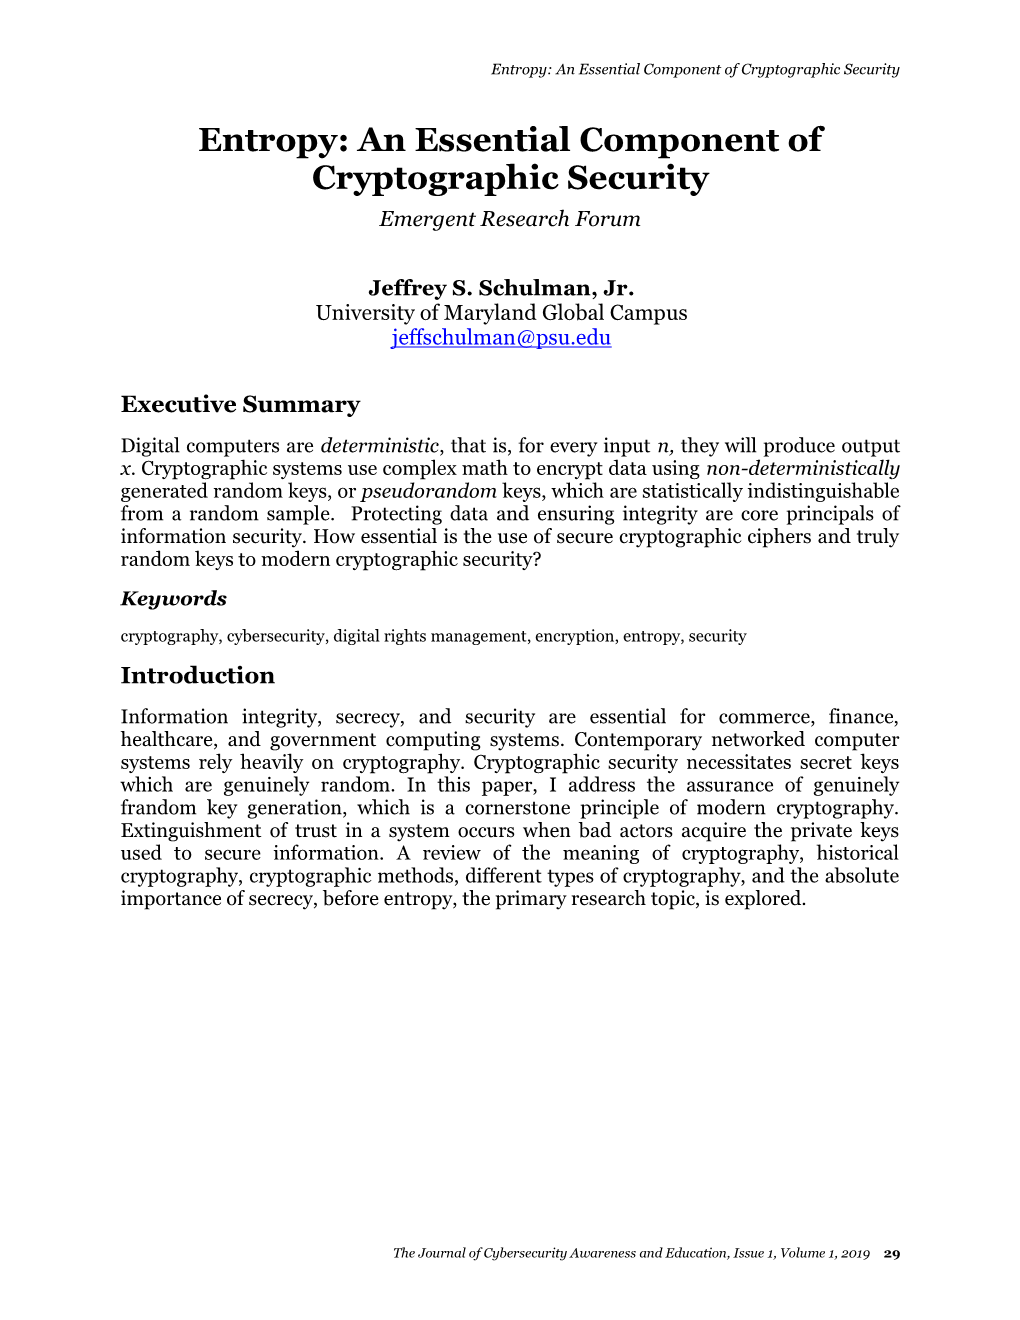 An Essential Component of Cryptographic Security